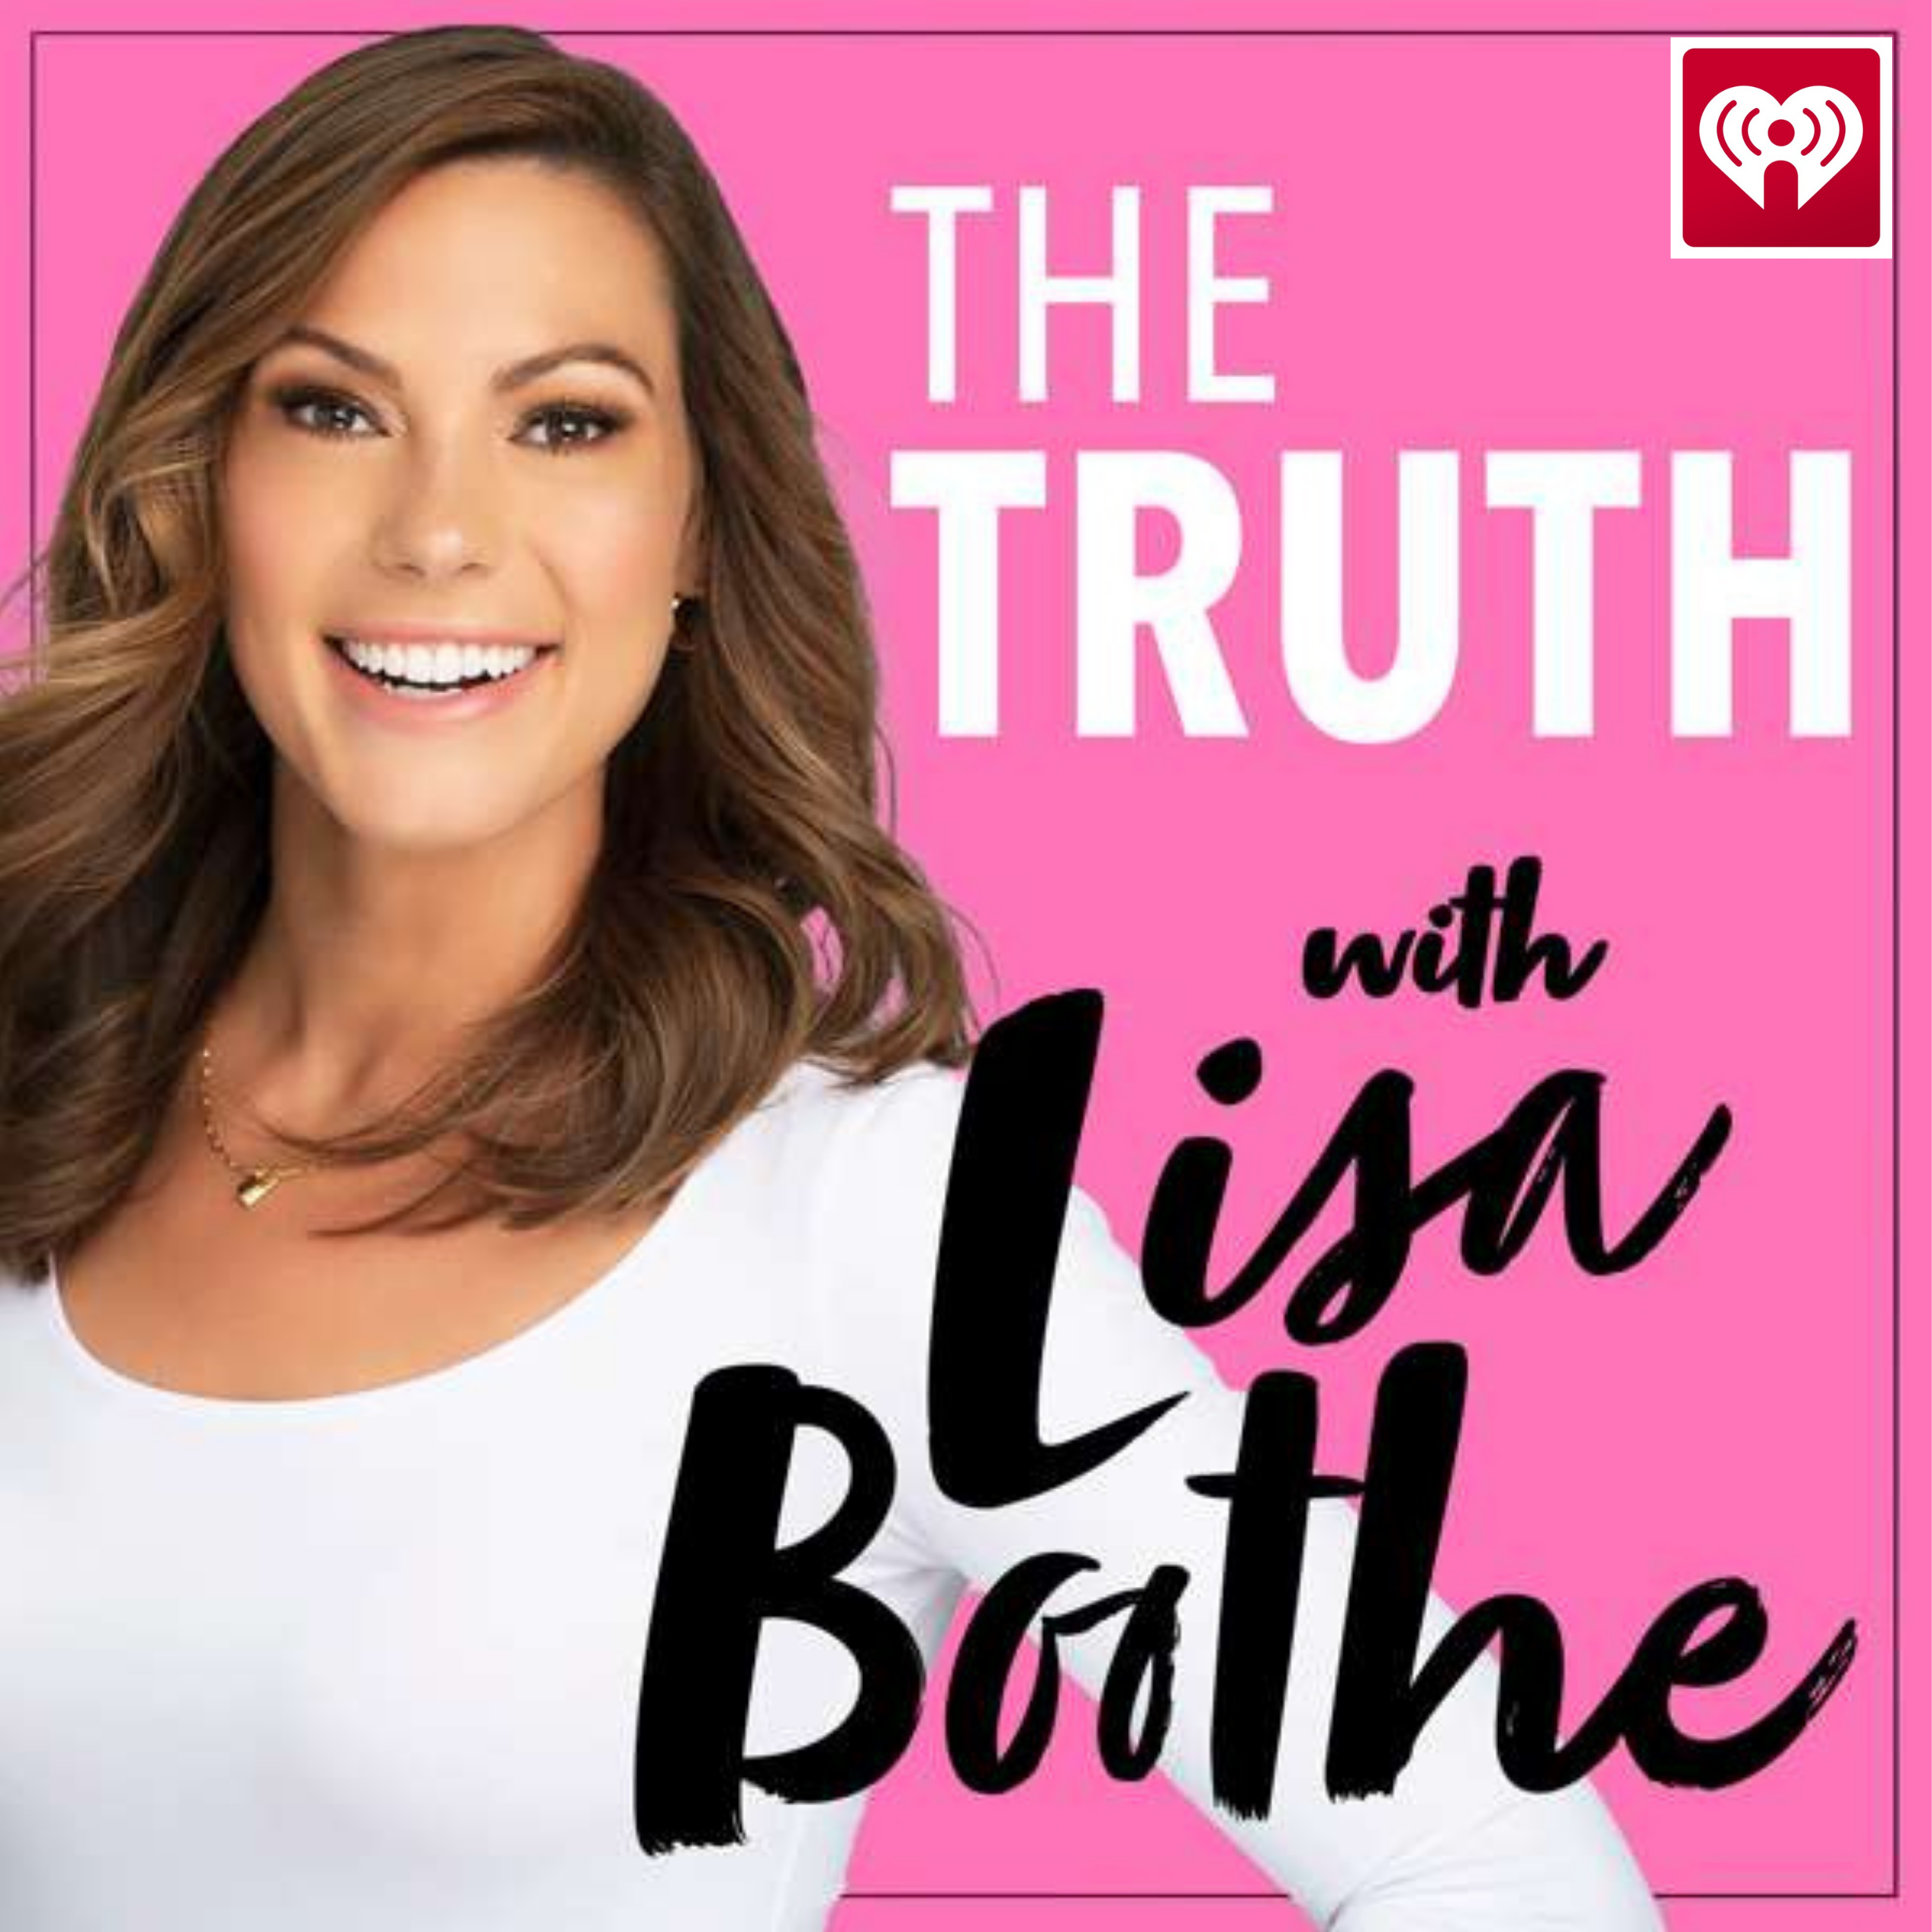 The Truth with Lisa Boothe: Exposing Anti-Semitism on College Campuses